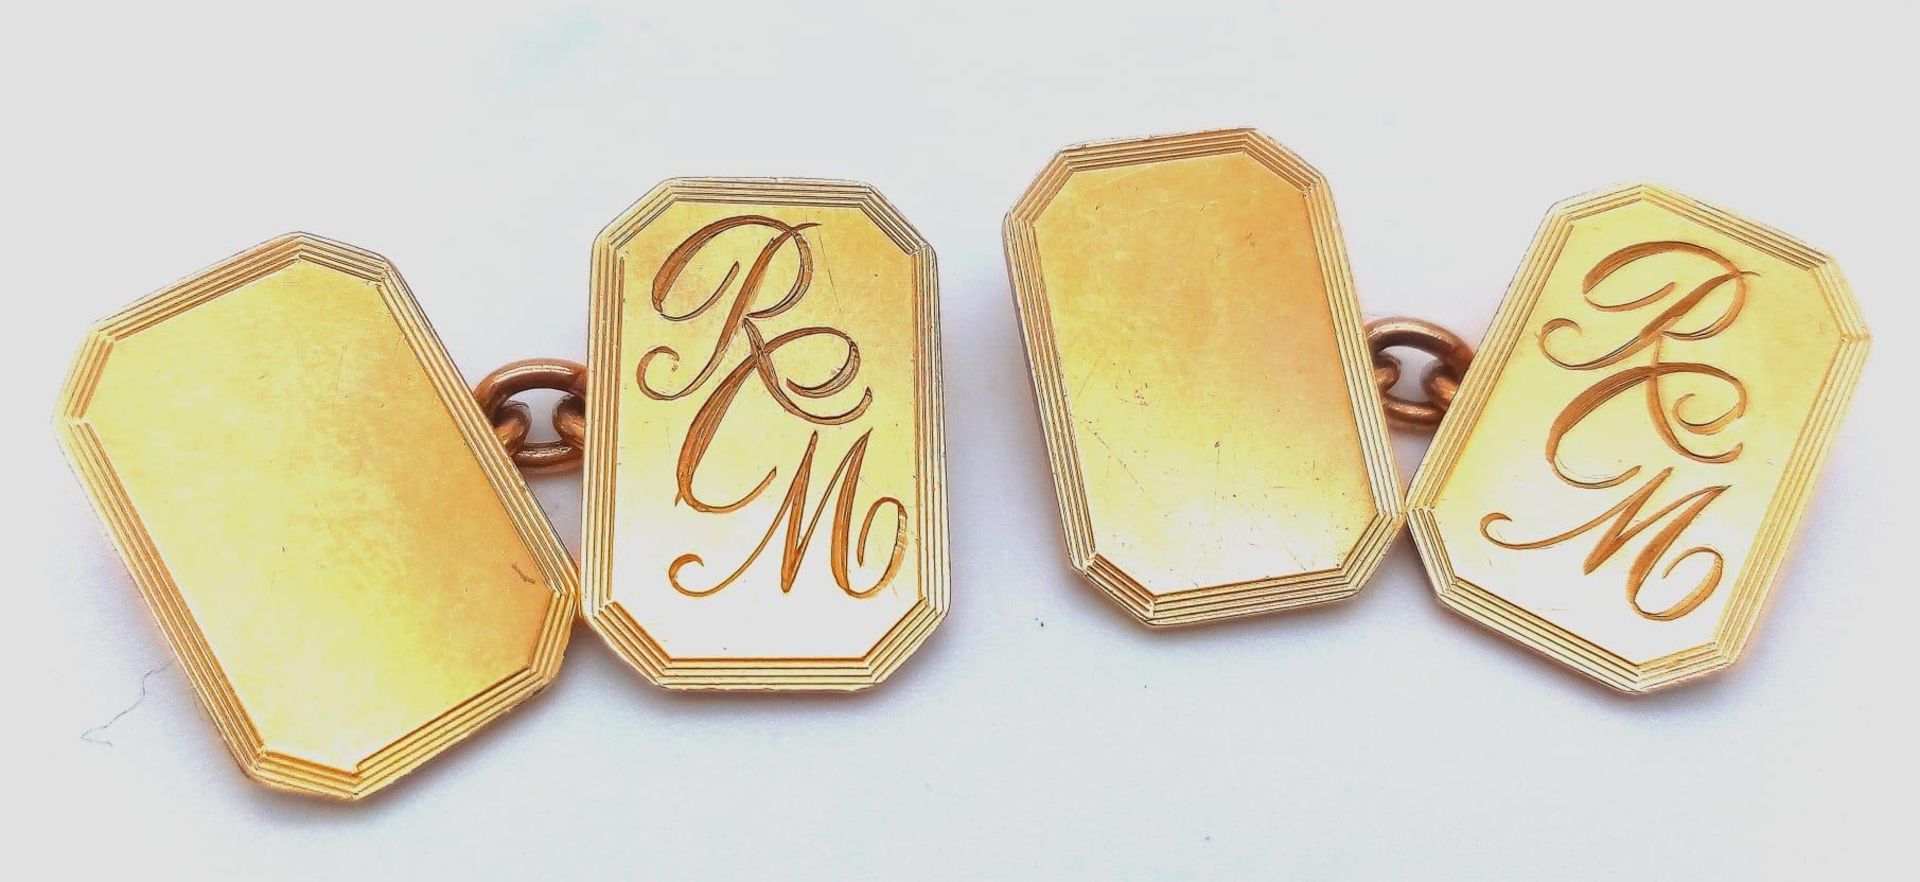 A VINTAGE PAIR OF CHAIN LINK CUFFLINKS WITH THE INITIALS "R.C.M." AND PRESENTED BY THE HEINZ COMPANY